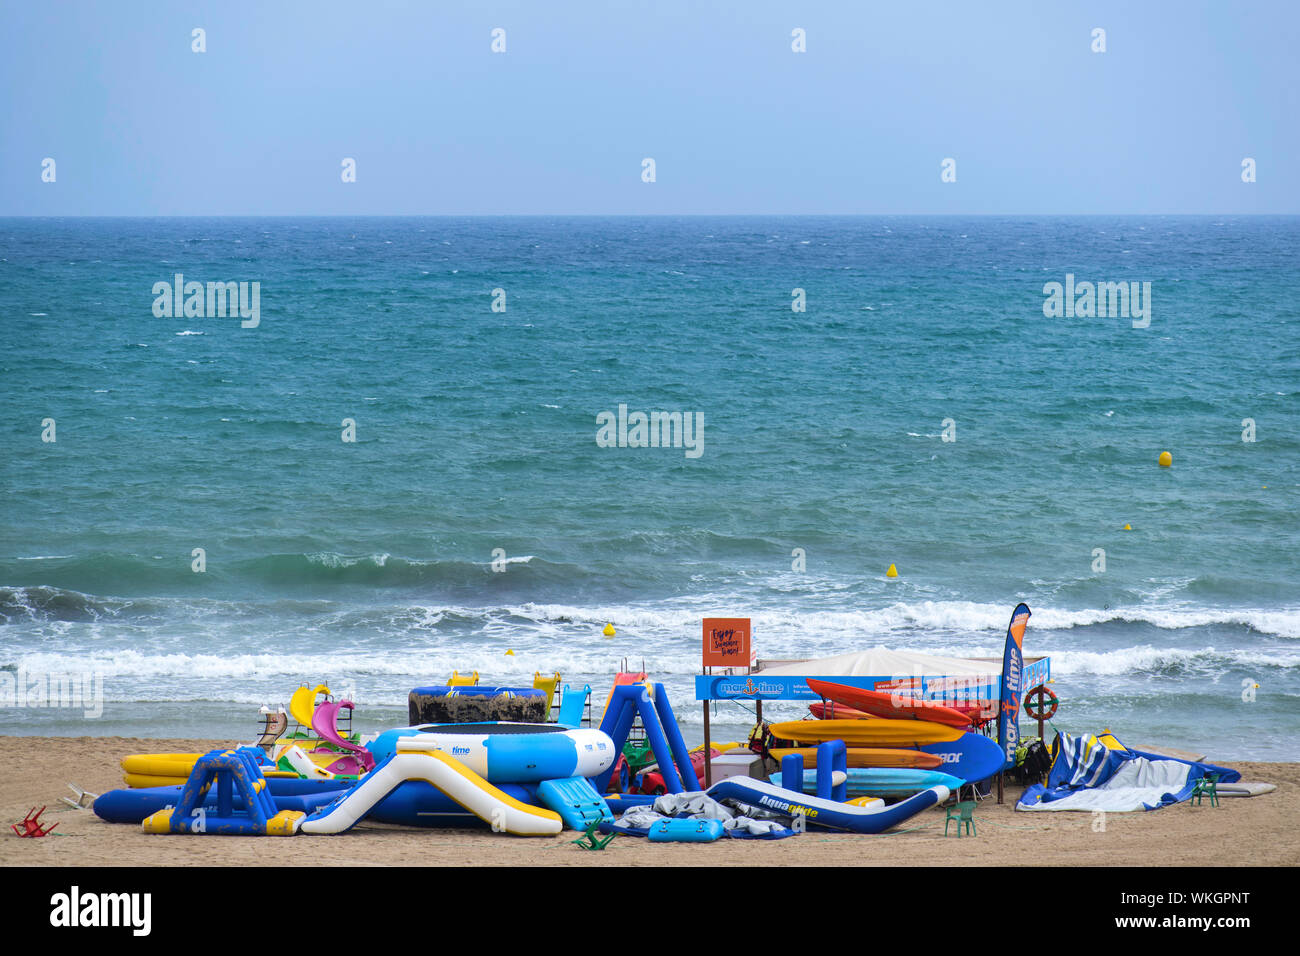 Air mattresses outside water in the seashore Stock Photo